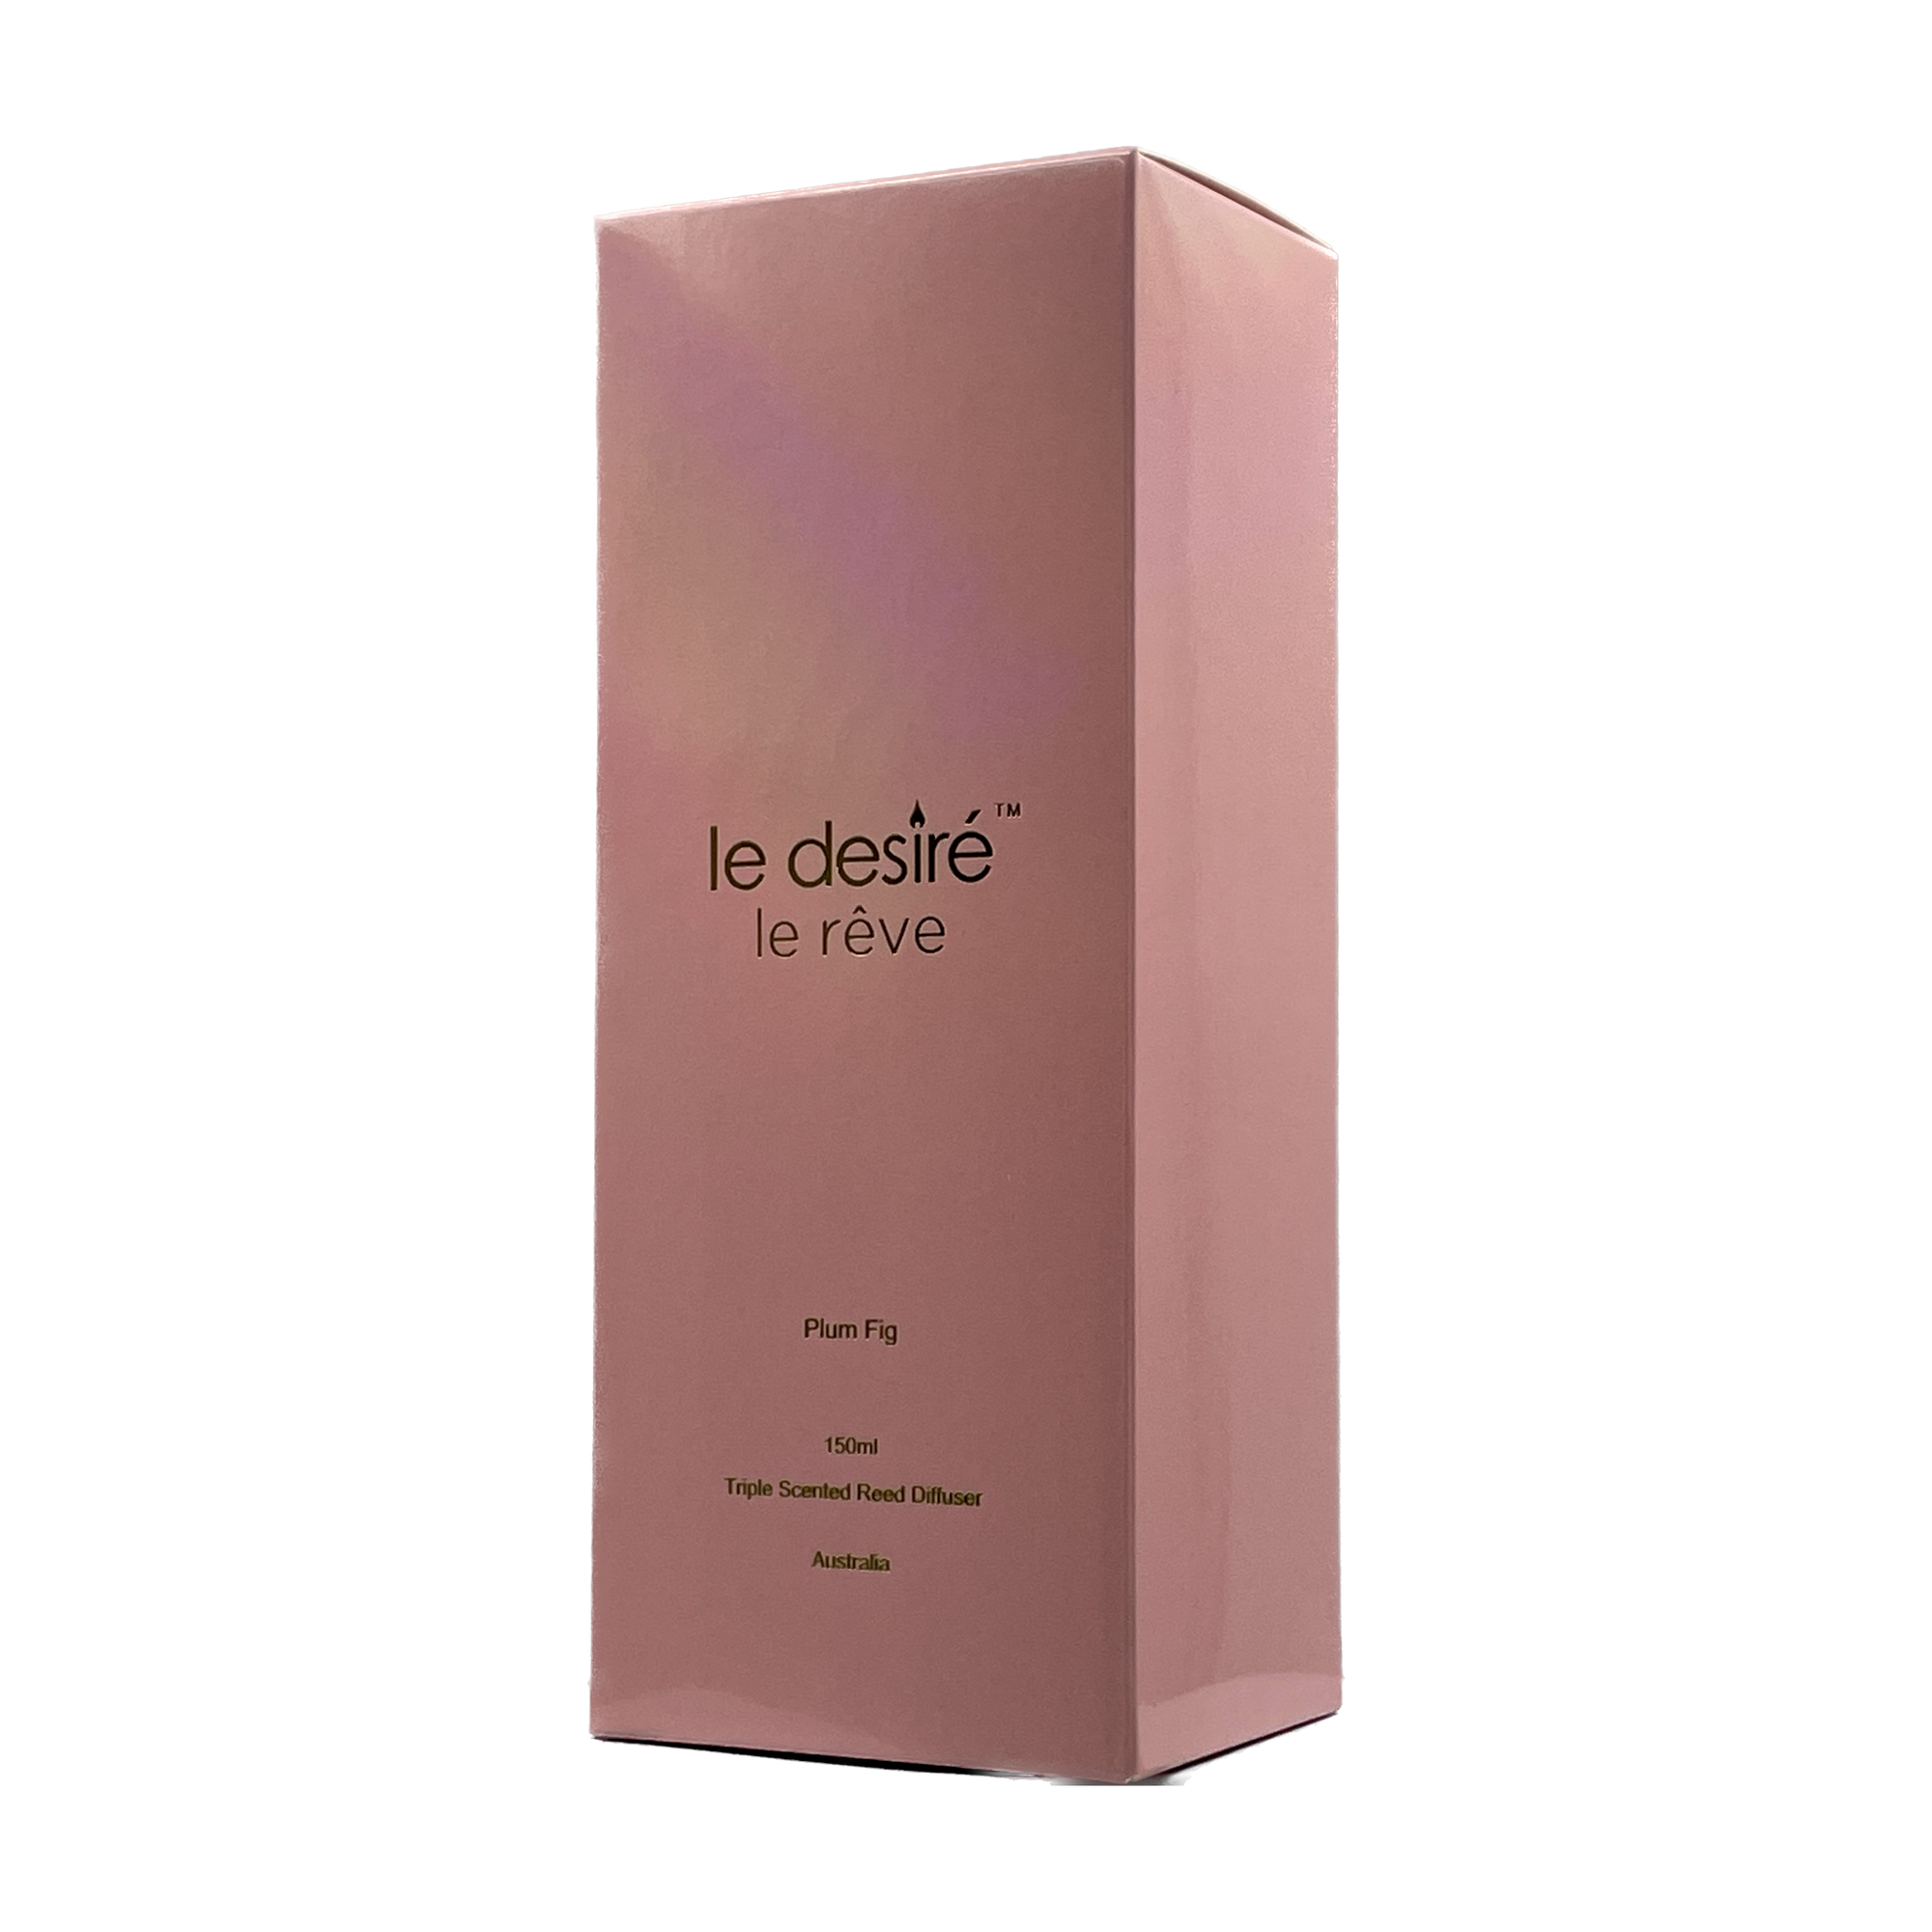 Plum Fig - le rêve Reed Diffuser